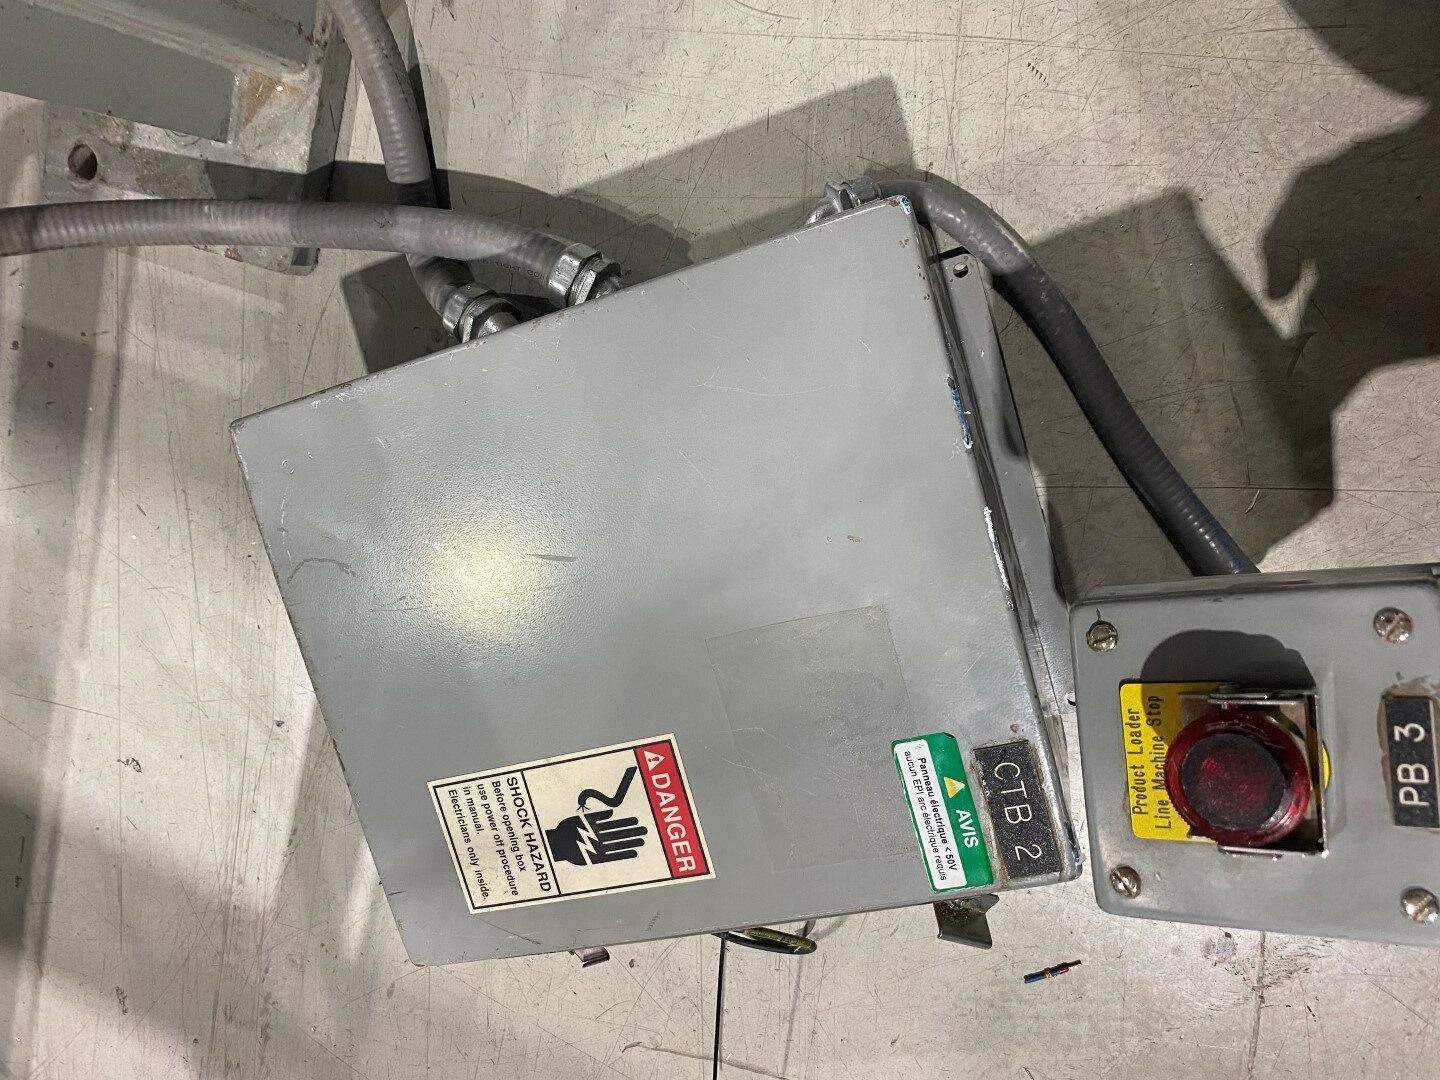 Used Roskam pick and place station with ABB IRB340 4 axis robot